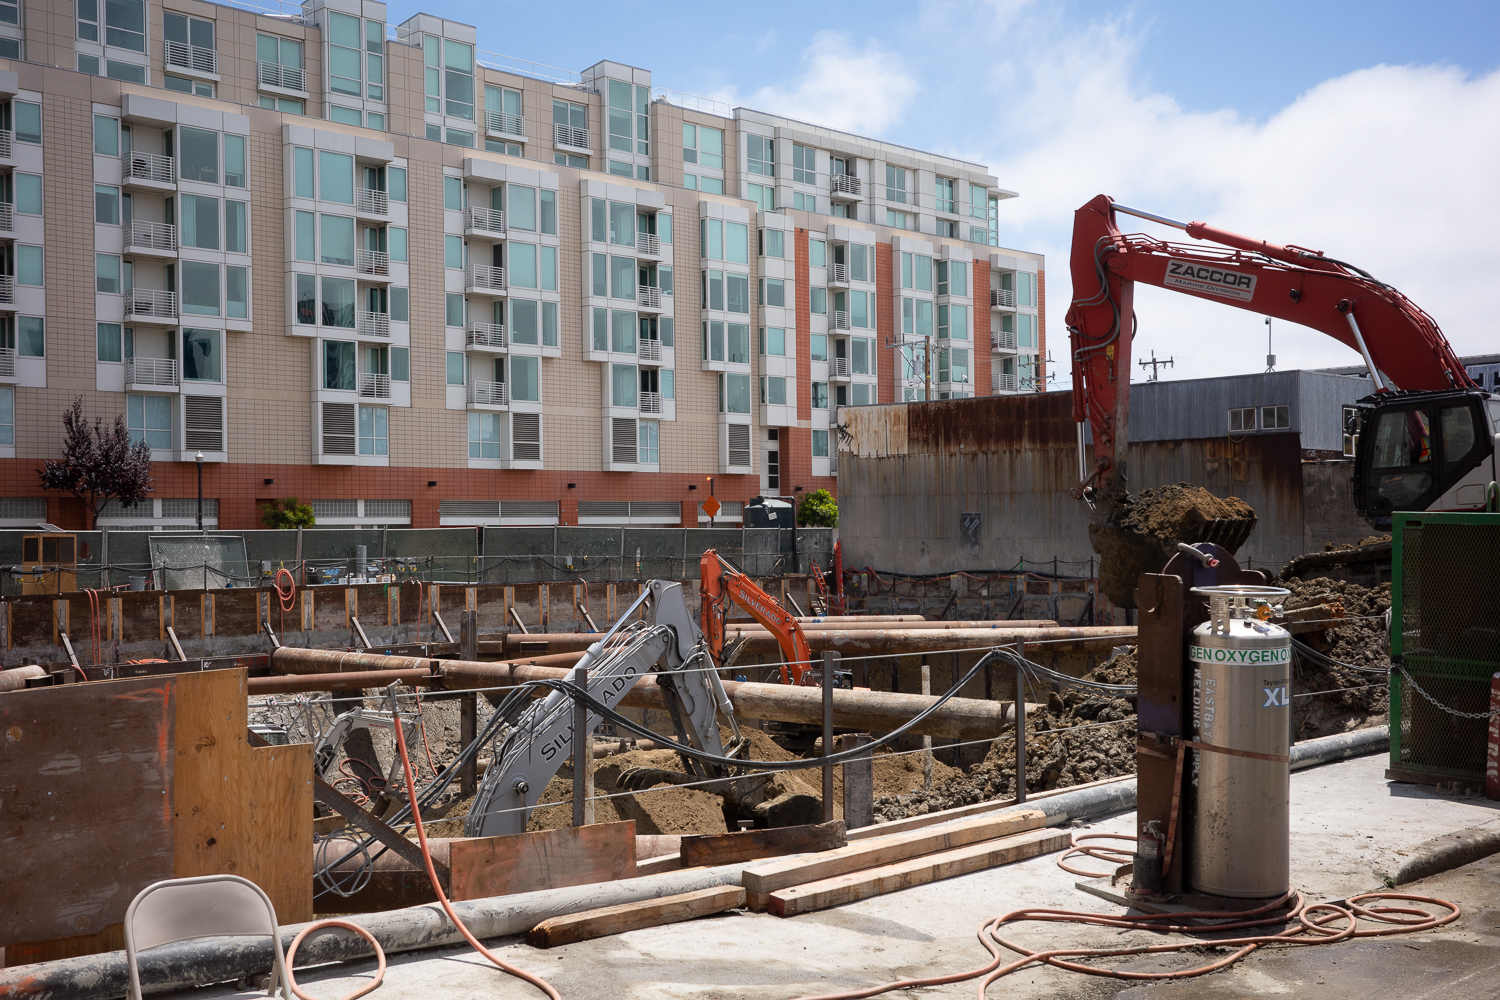 555 Bryant Street construction update, image by author